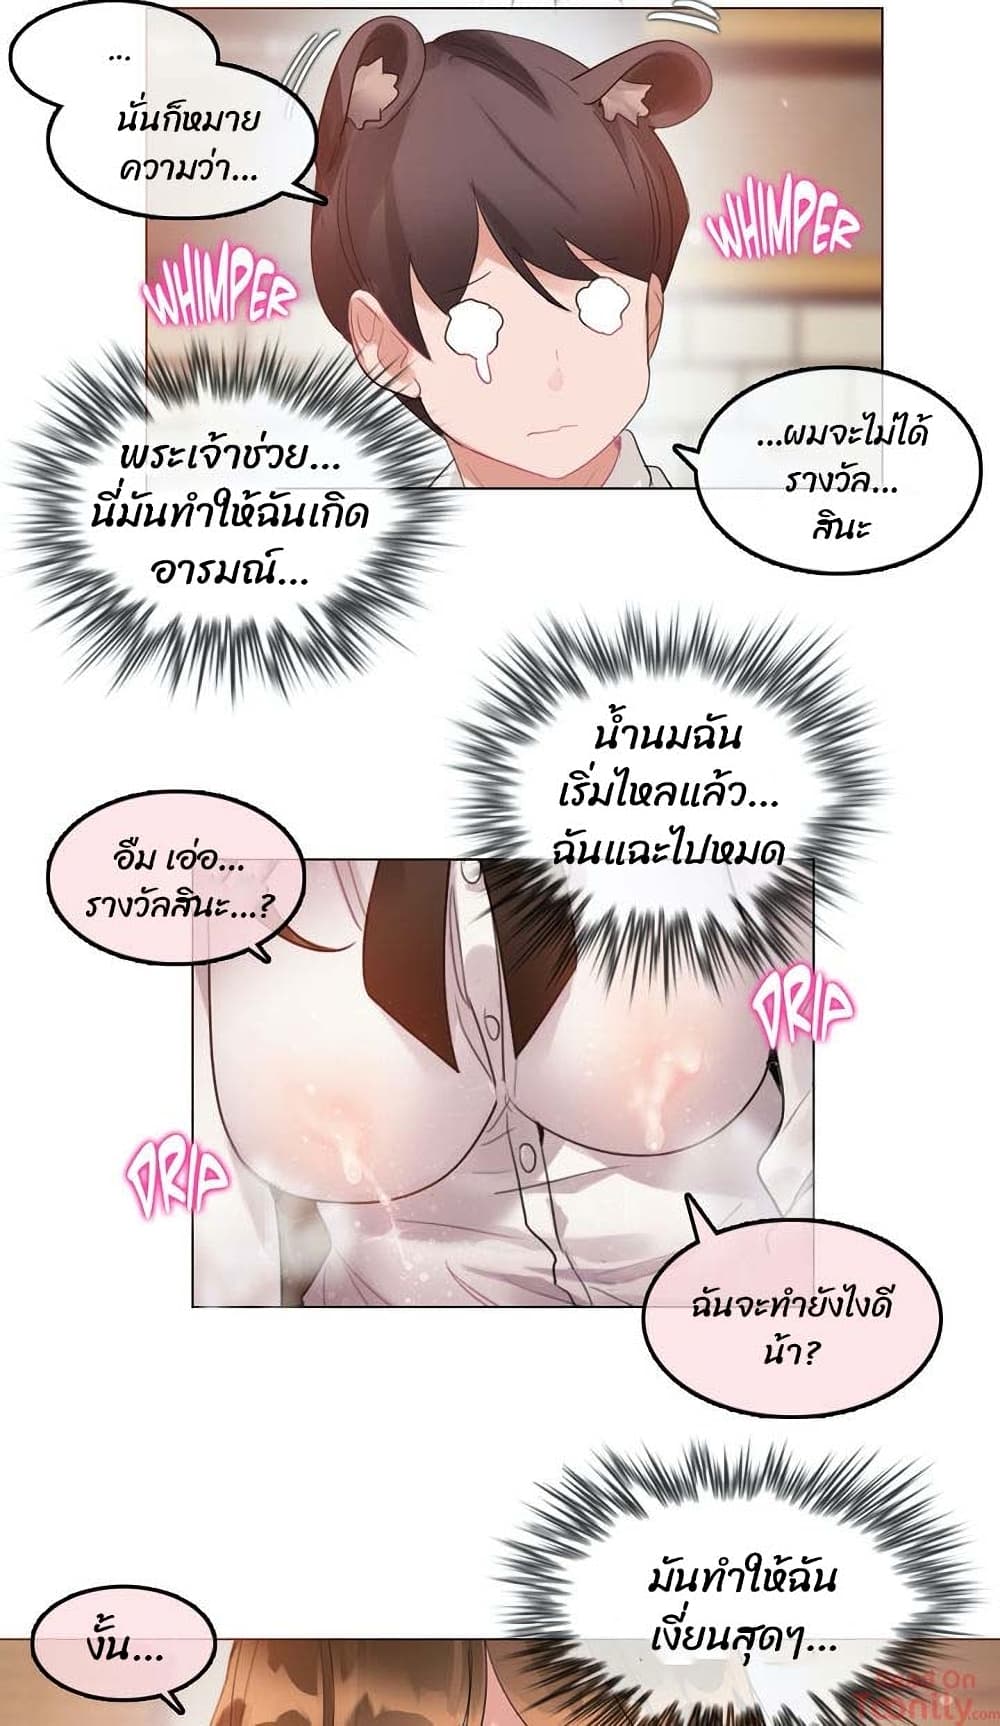 A Pervert's Daily Life 84 (29)